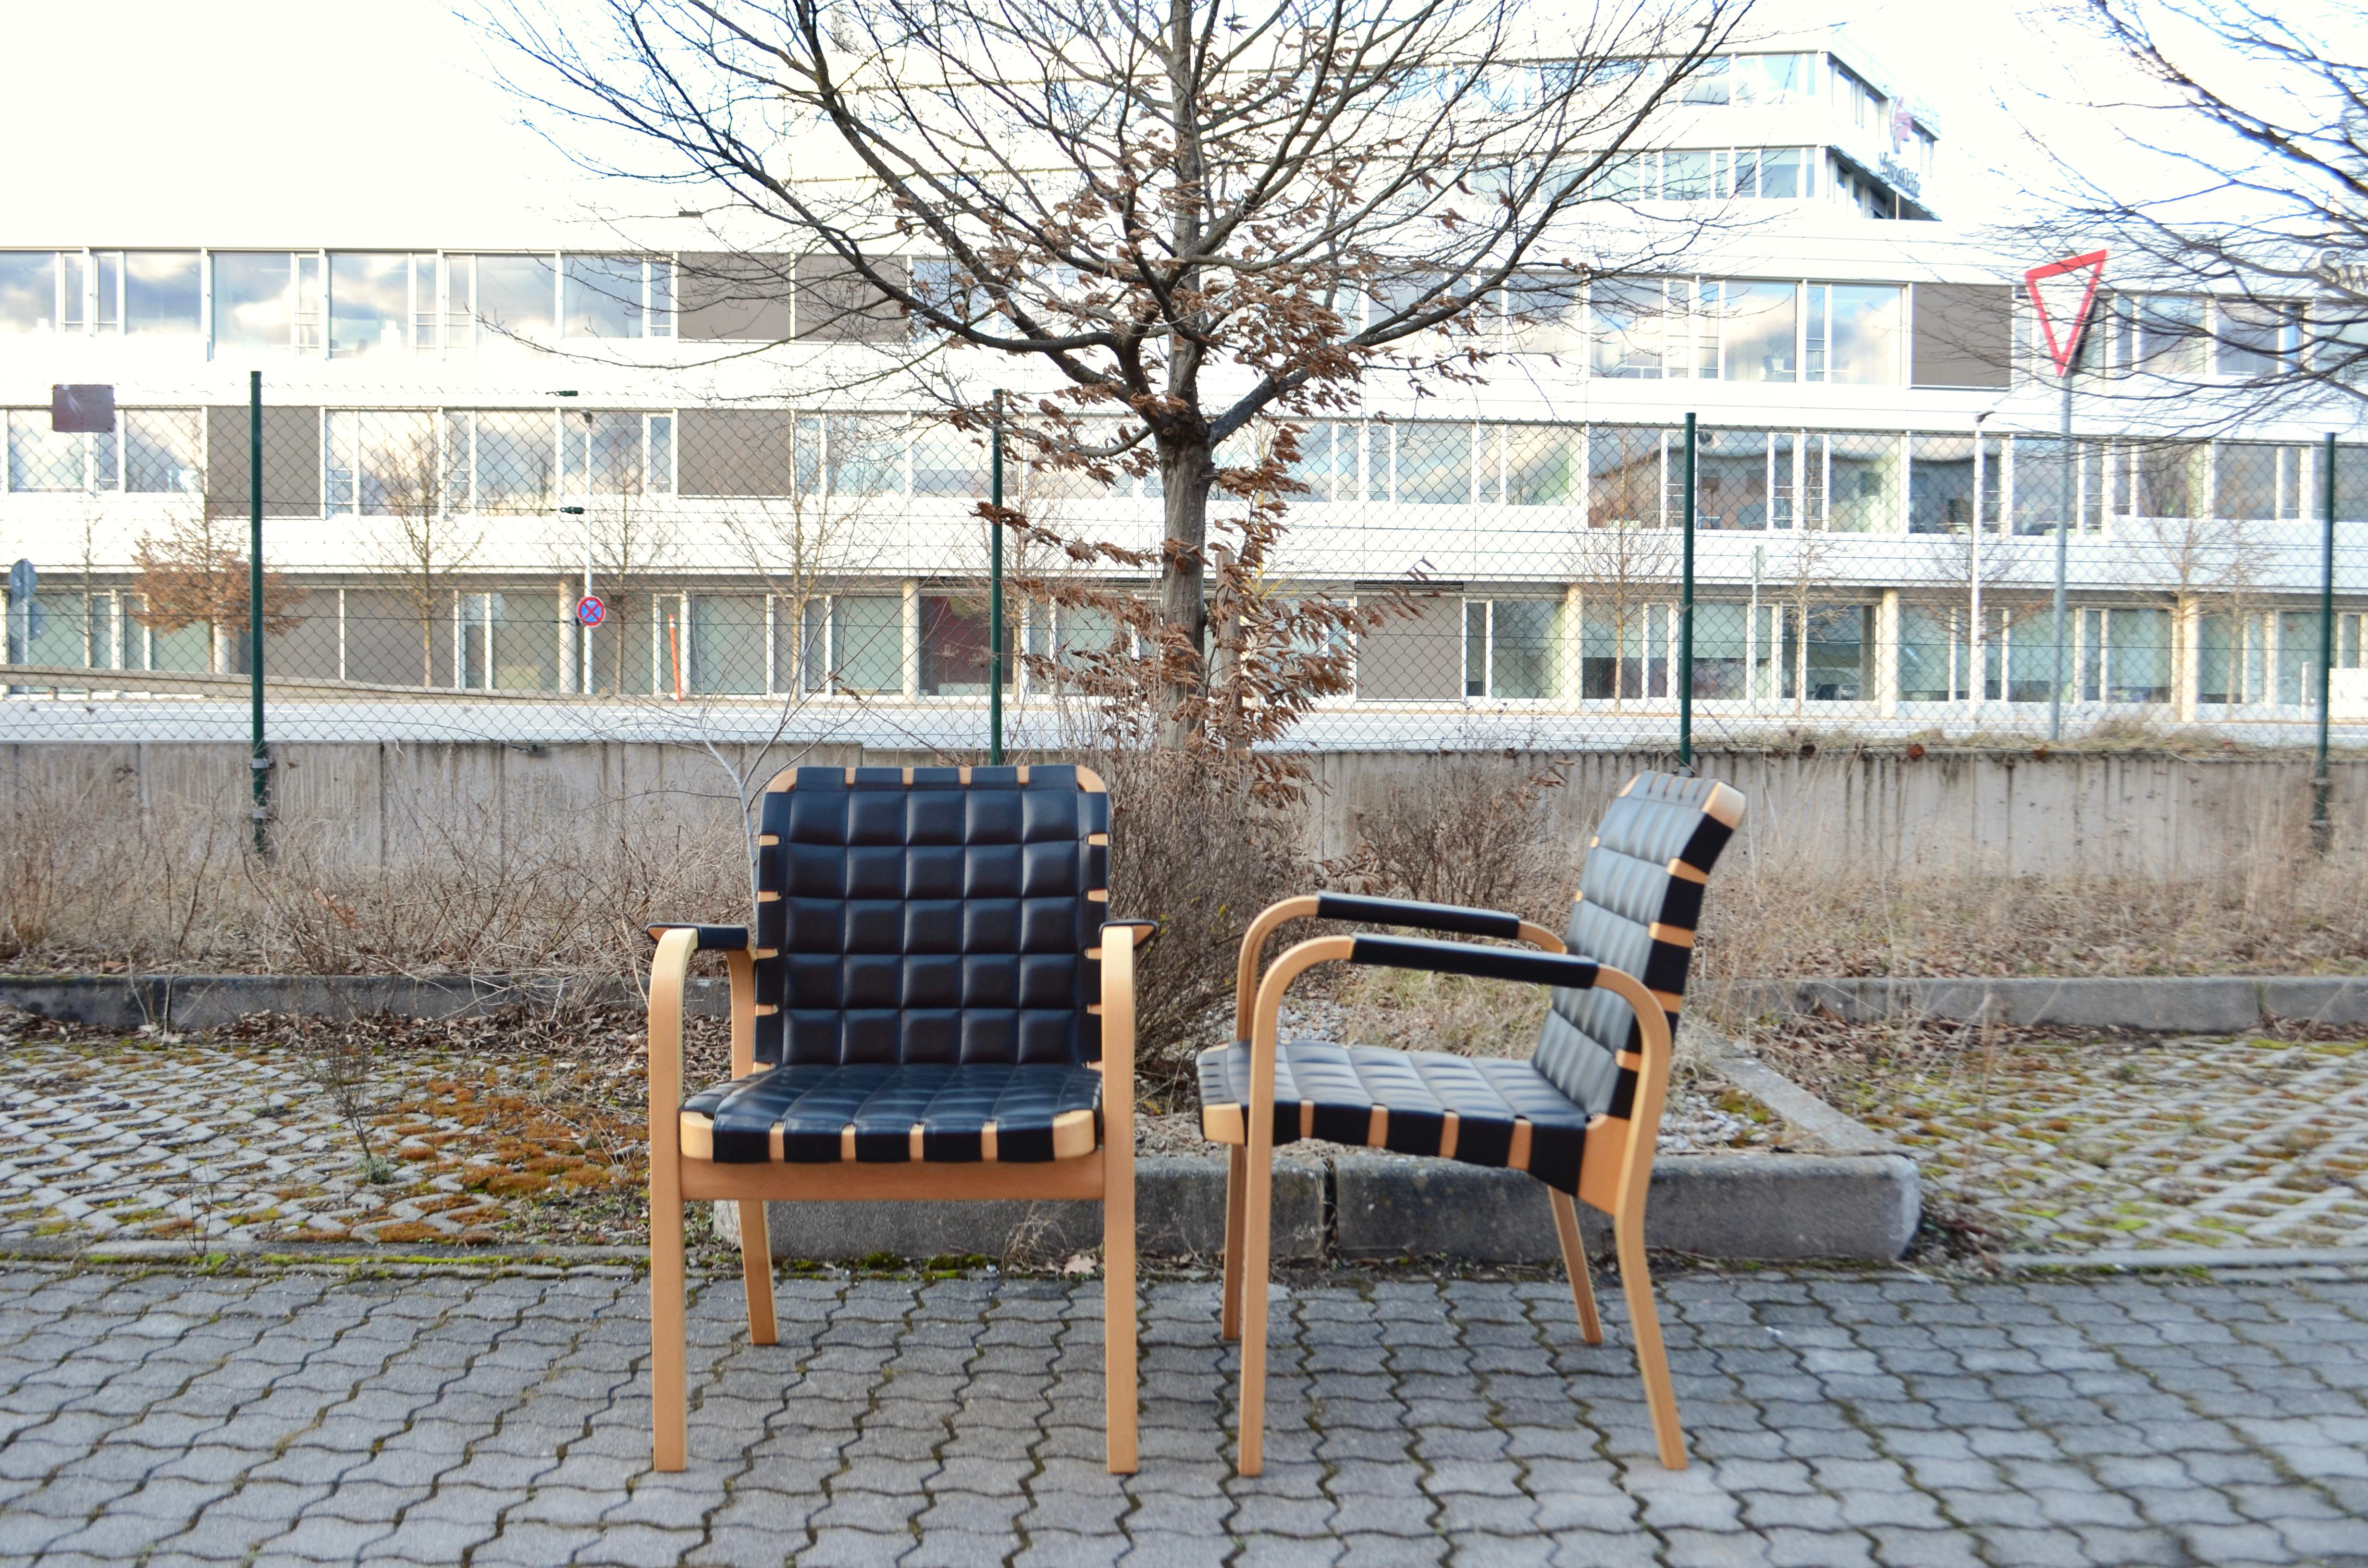 Rare armchair Model 45 from Alvar Aalto.Made of laminated birch wood and black aniline leather.
Manufactured by Artek.
The chairs are very comfortable and lightweighted.
They are in best condtion.
It wasn't used often. Near mint condition.
The birch